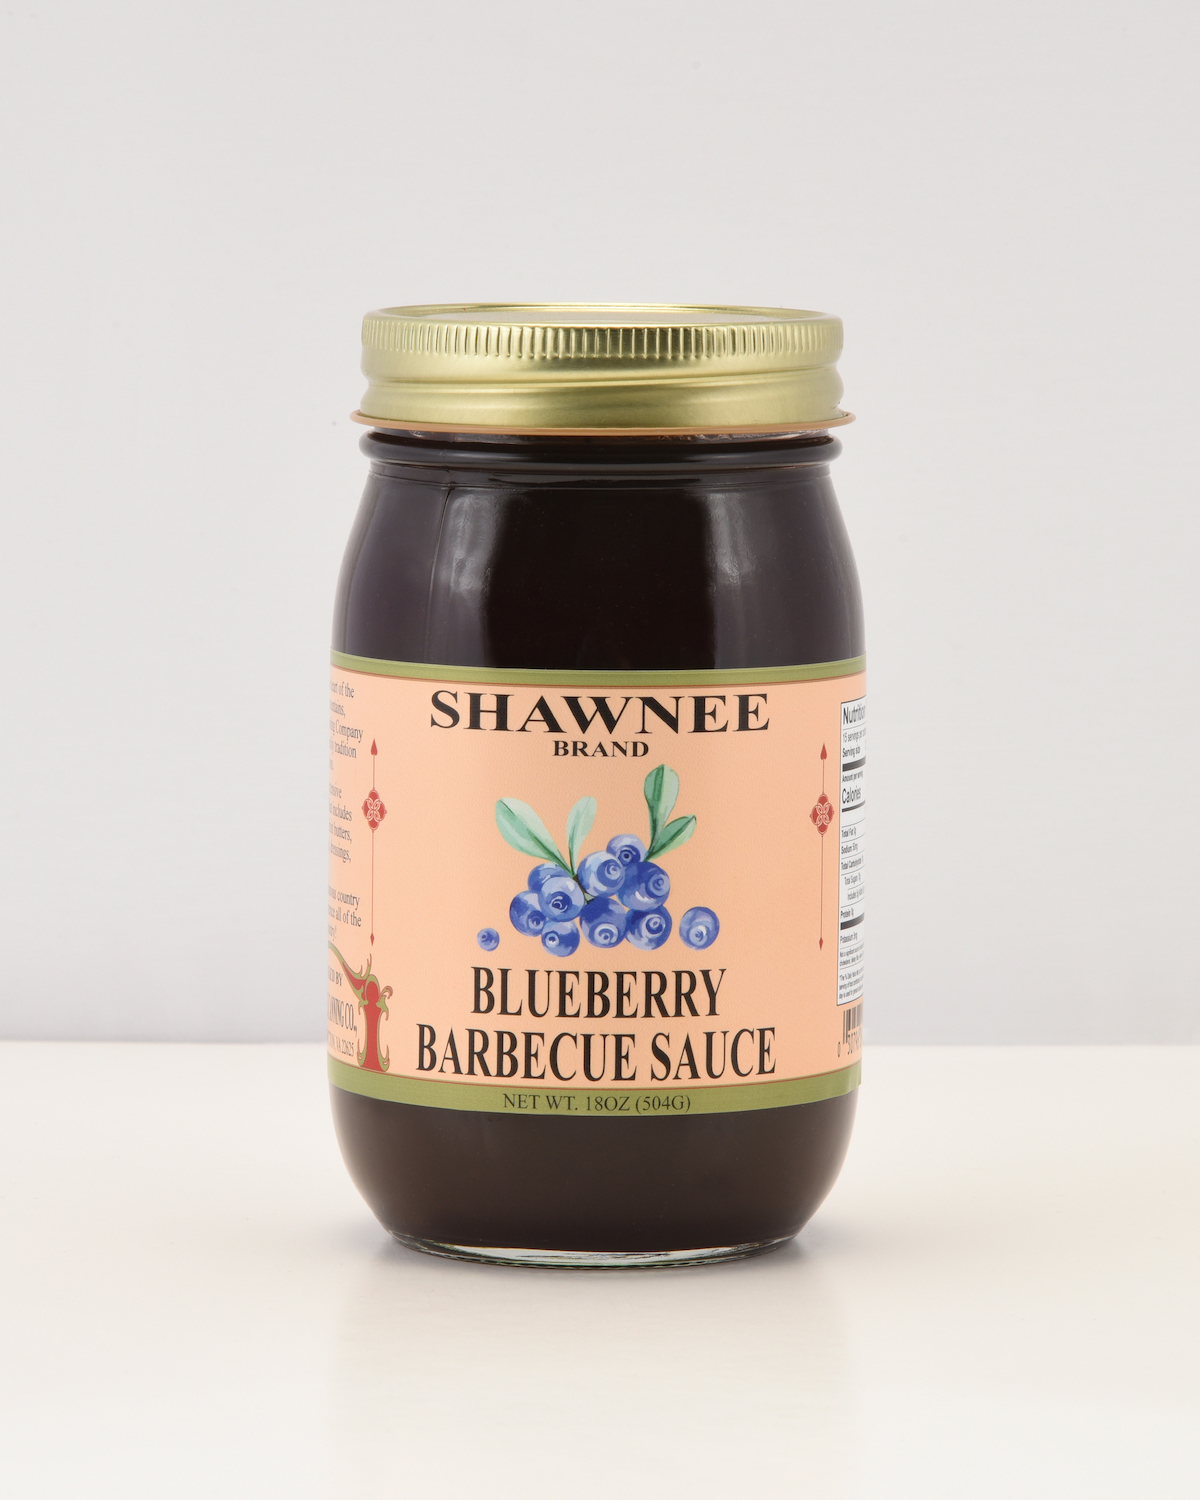 Blueberry Barbecue Sauce - Shawnee Canning Company